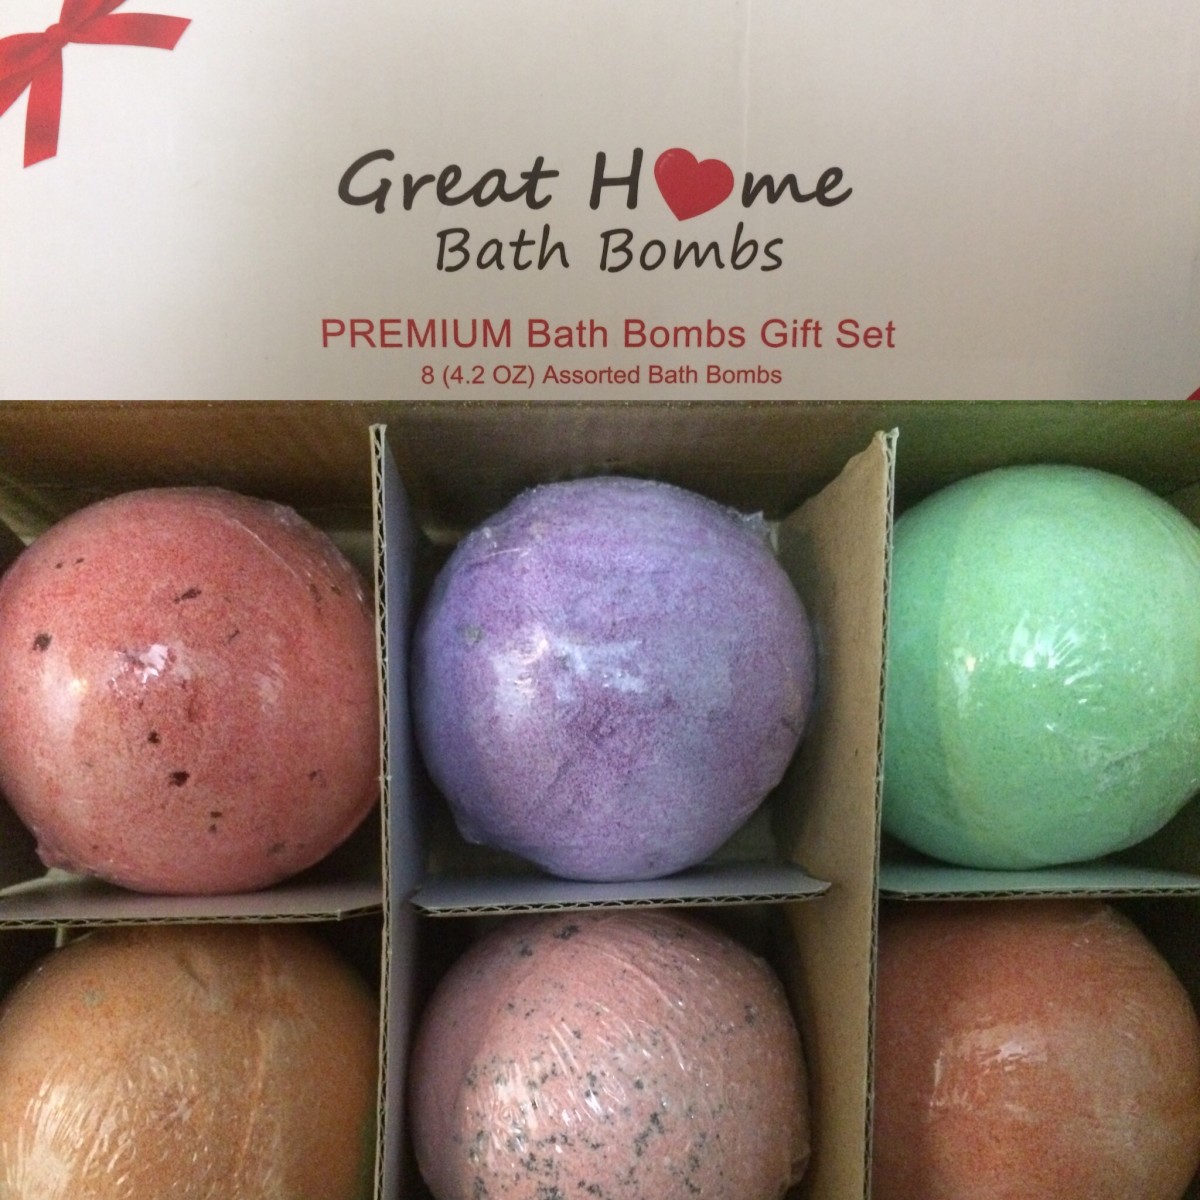 Review of Great Home Bath Bombs Gift Set